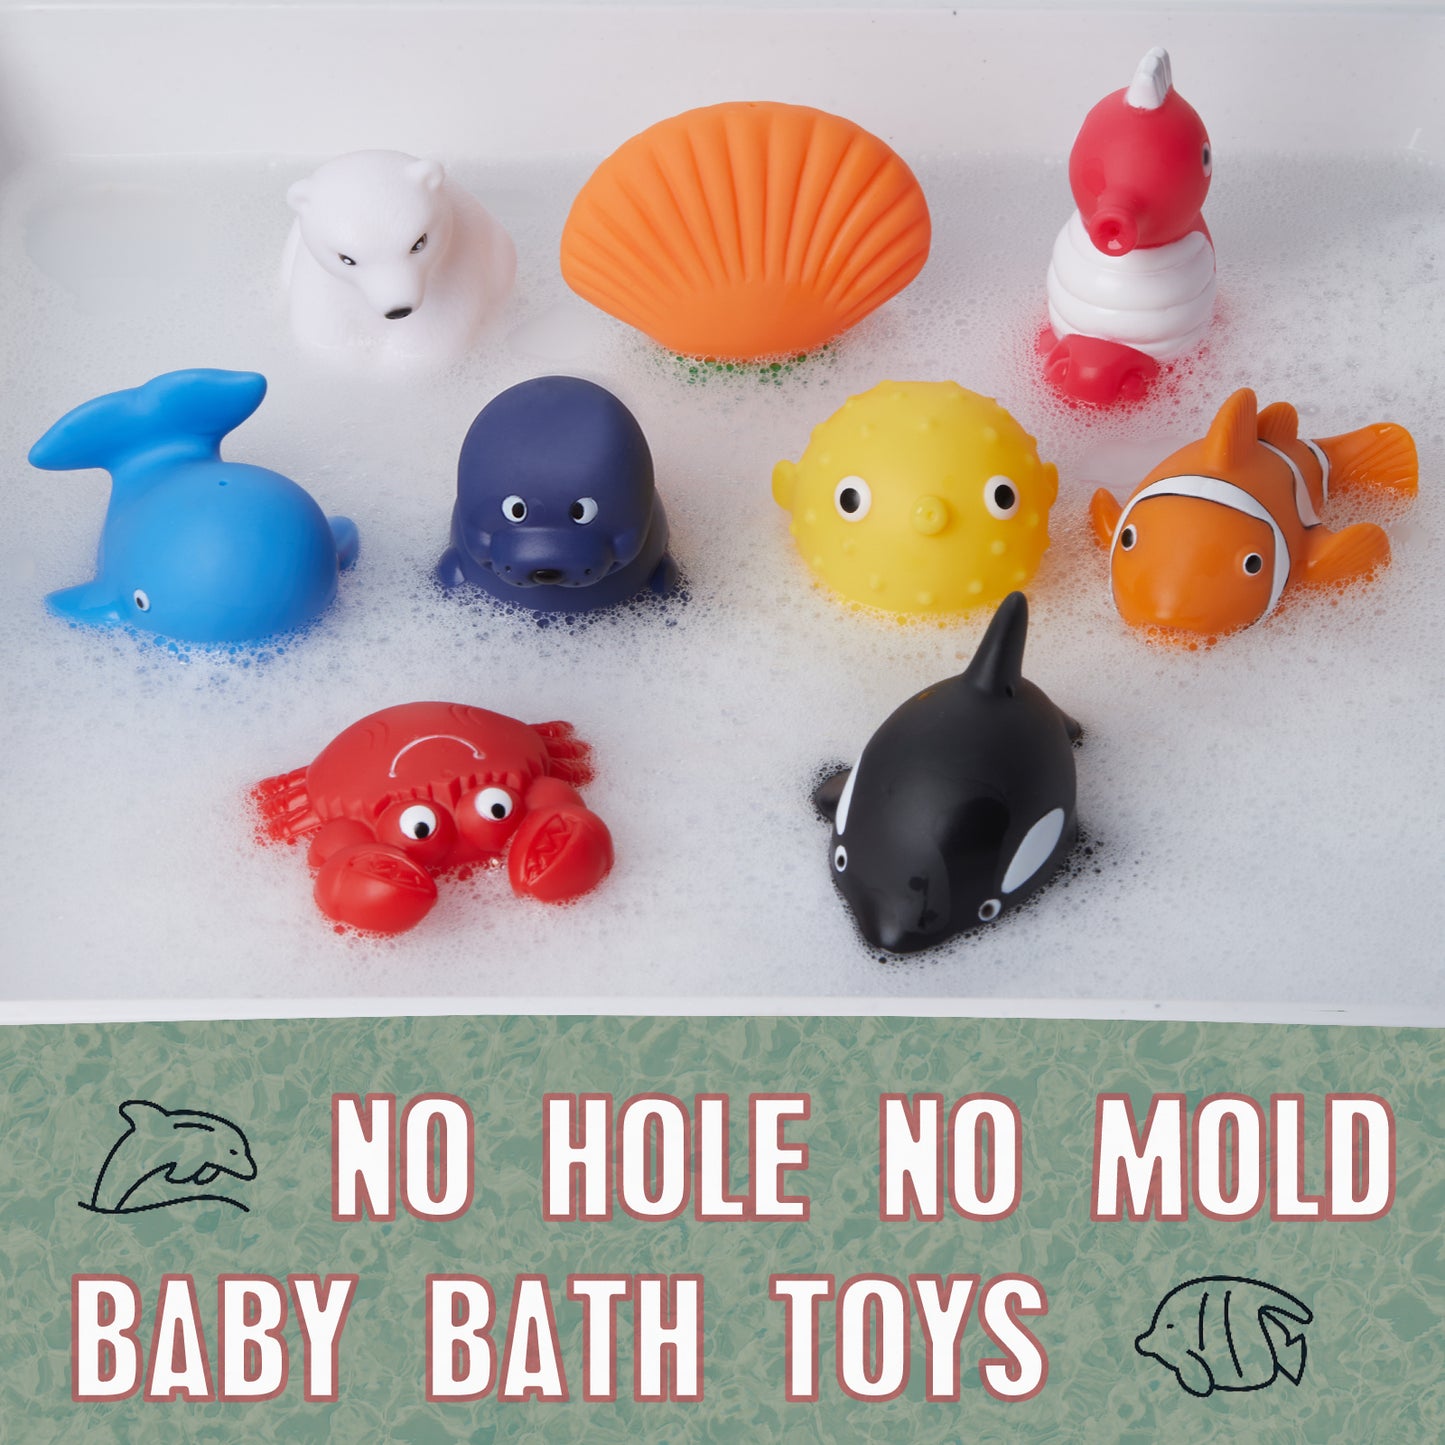 Mold Free Ocean Bath Toys for Toddlers/ Infants 6 - 12- 18 Months, No Hole Baby Bathtub Toys, 1 2 3 4 Years Old Kids (9 Pcs Ocean Animals with Mesh Bag)